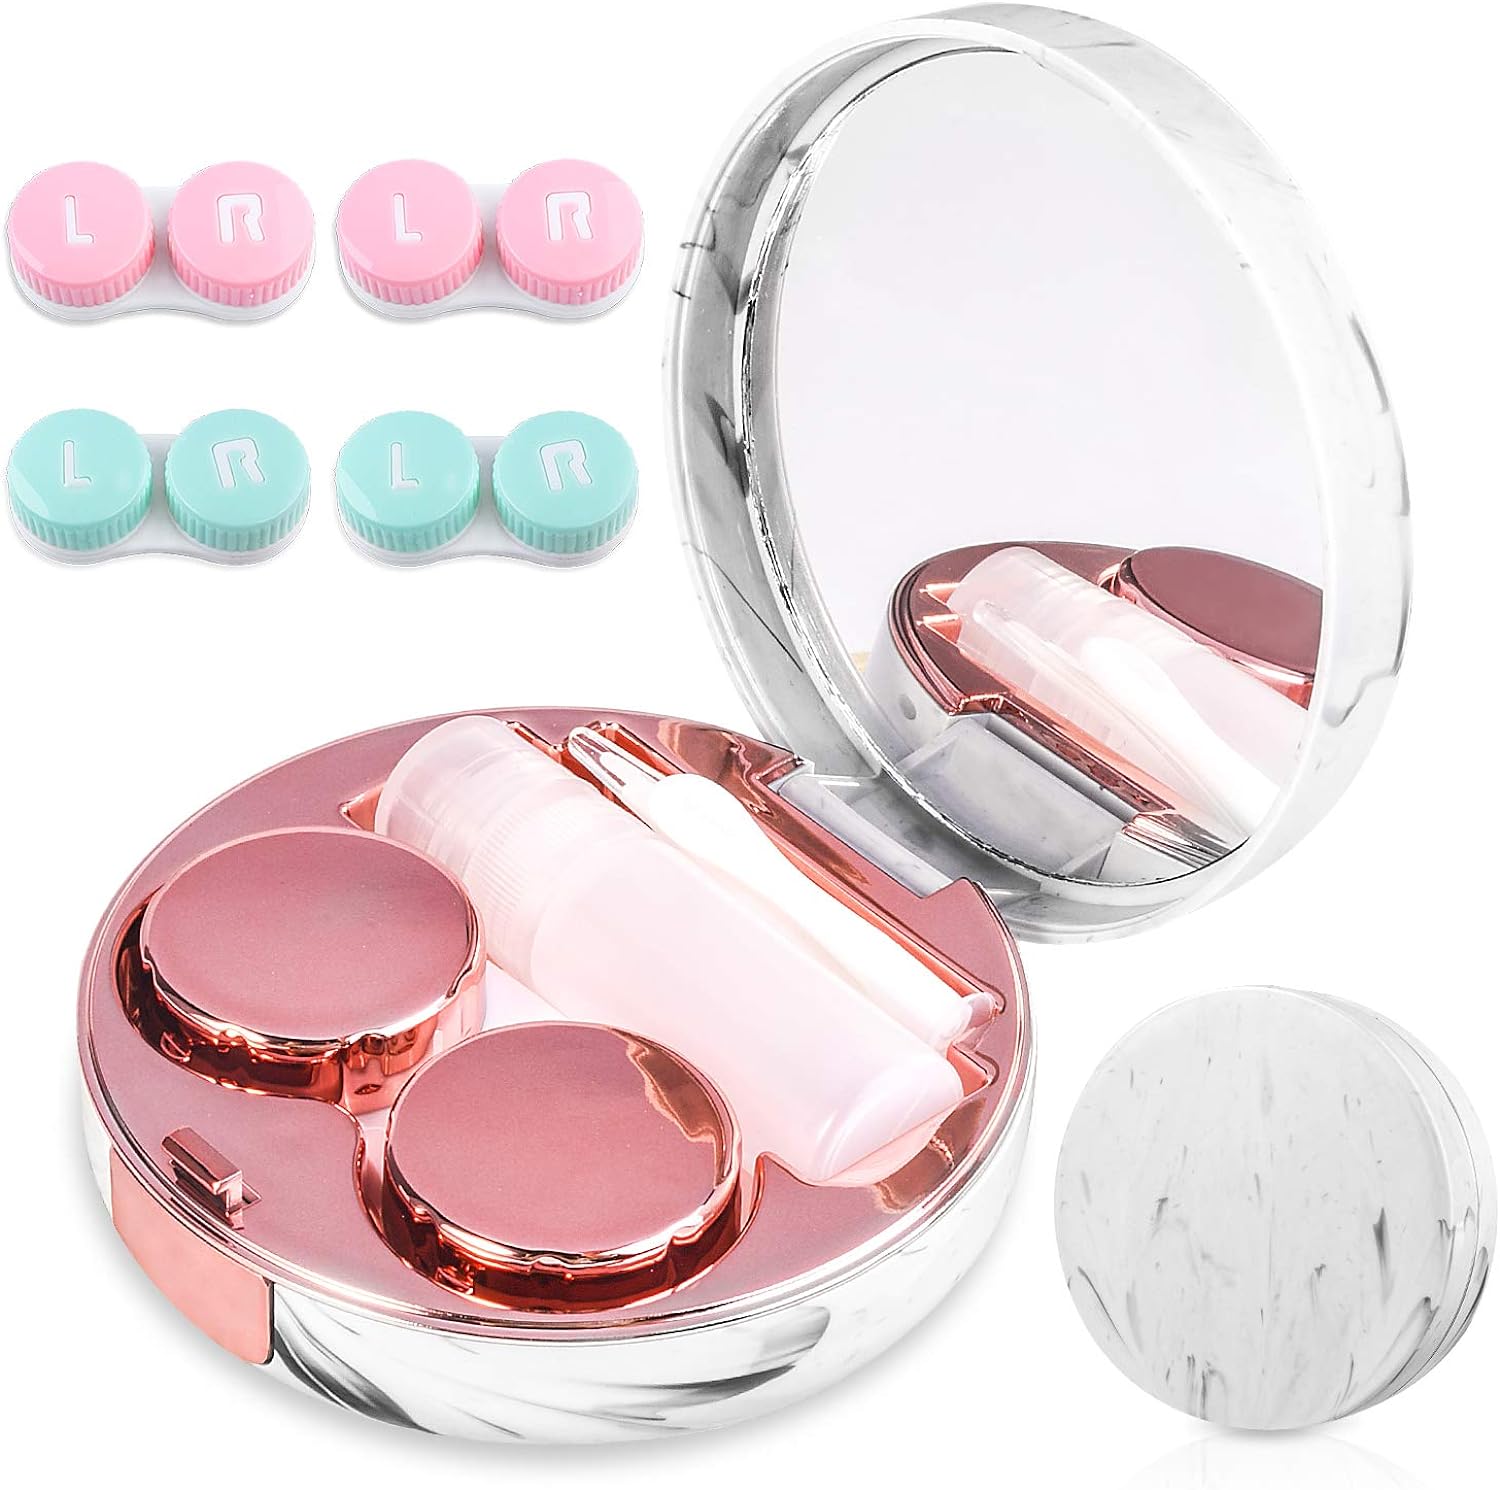 Contact Lens Cases, 5 in 1 Travel Contact Lens Box with Mirror Tweezers Remover Tool Solution Bottle for Outdoor Office Daily Use